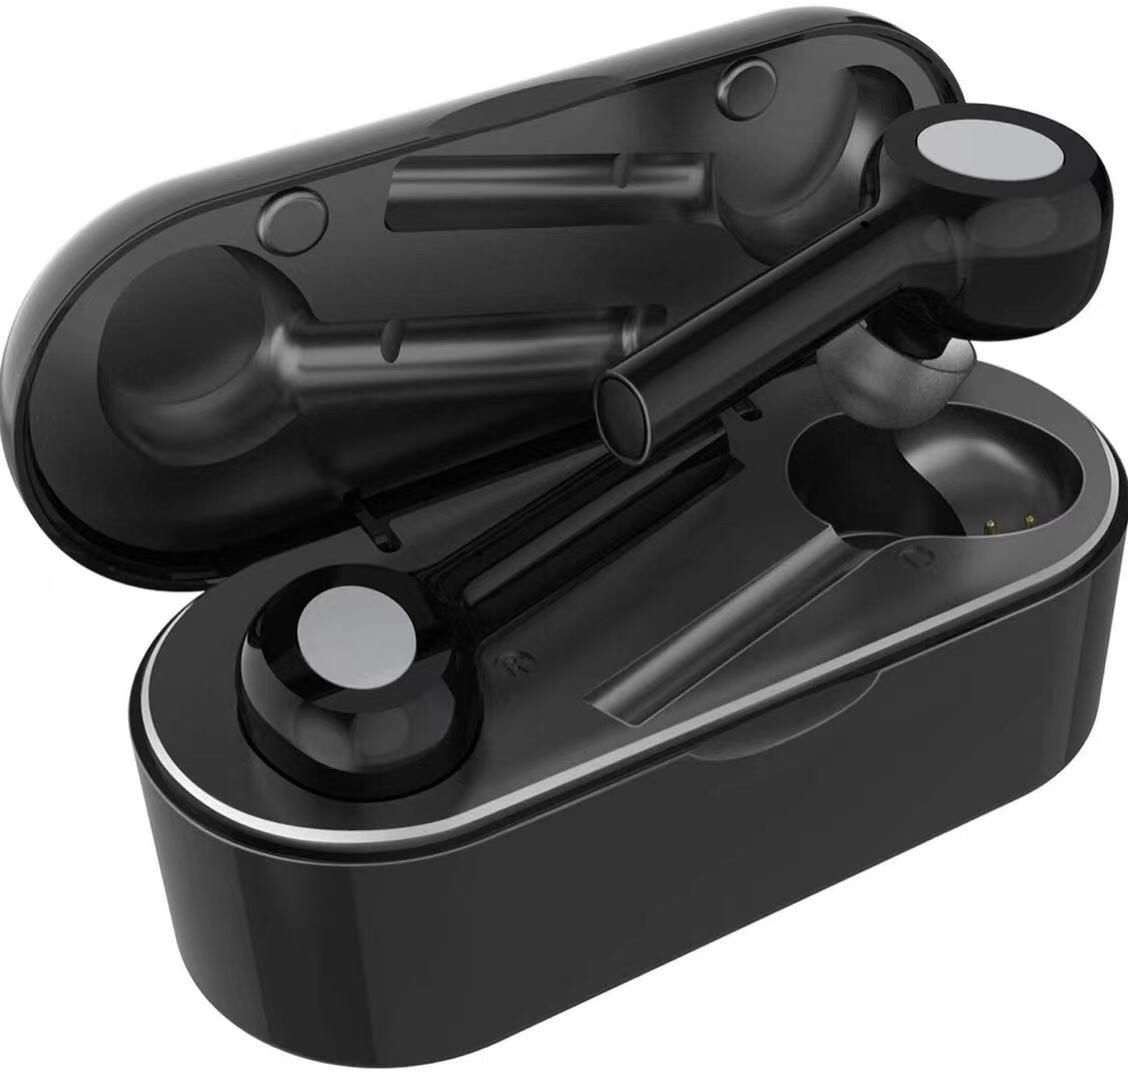 Wireless Earbuds, True Wireless Earbuds Bluetooth 5.0 Stereo Bluetooth Headphones TWS in-Ear Headset with Charging Case, Built-in Mic (Black+Silver)